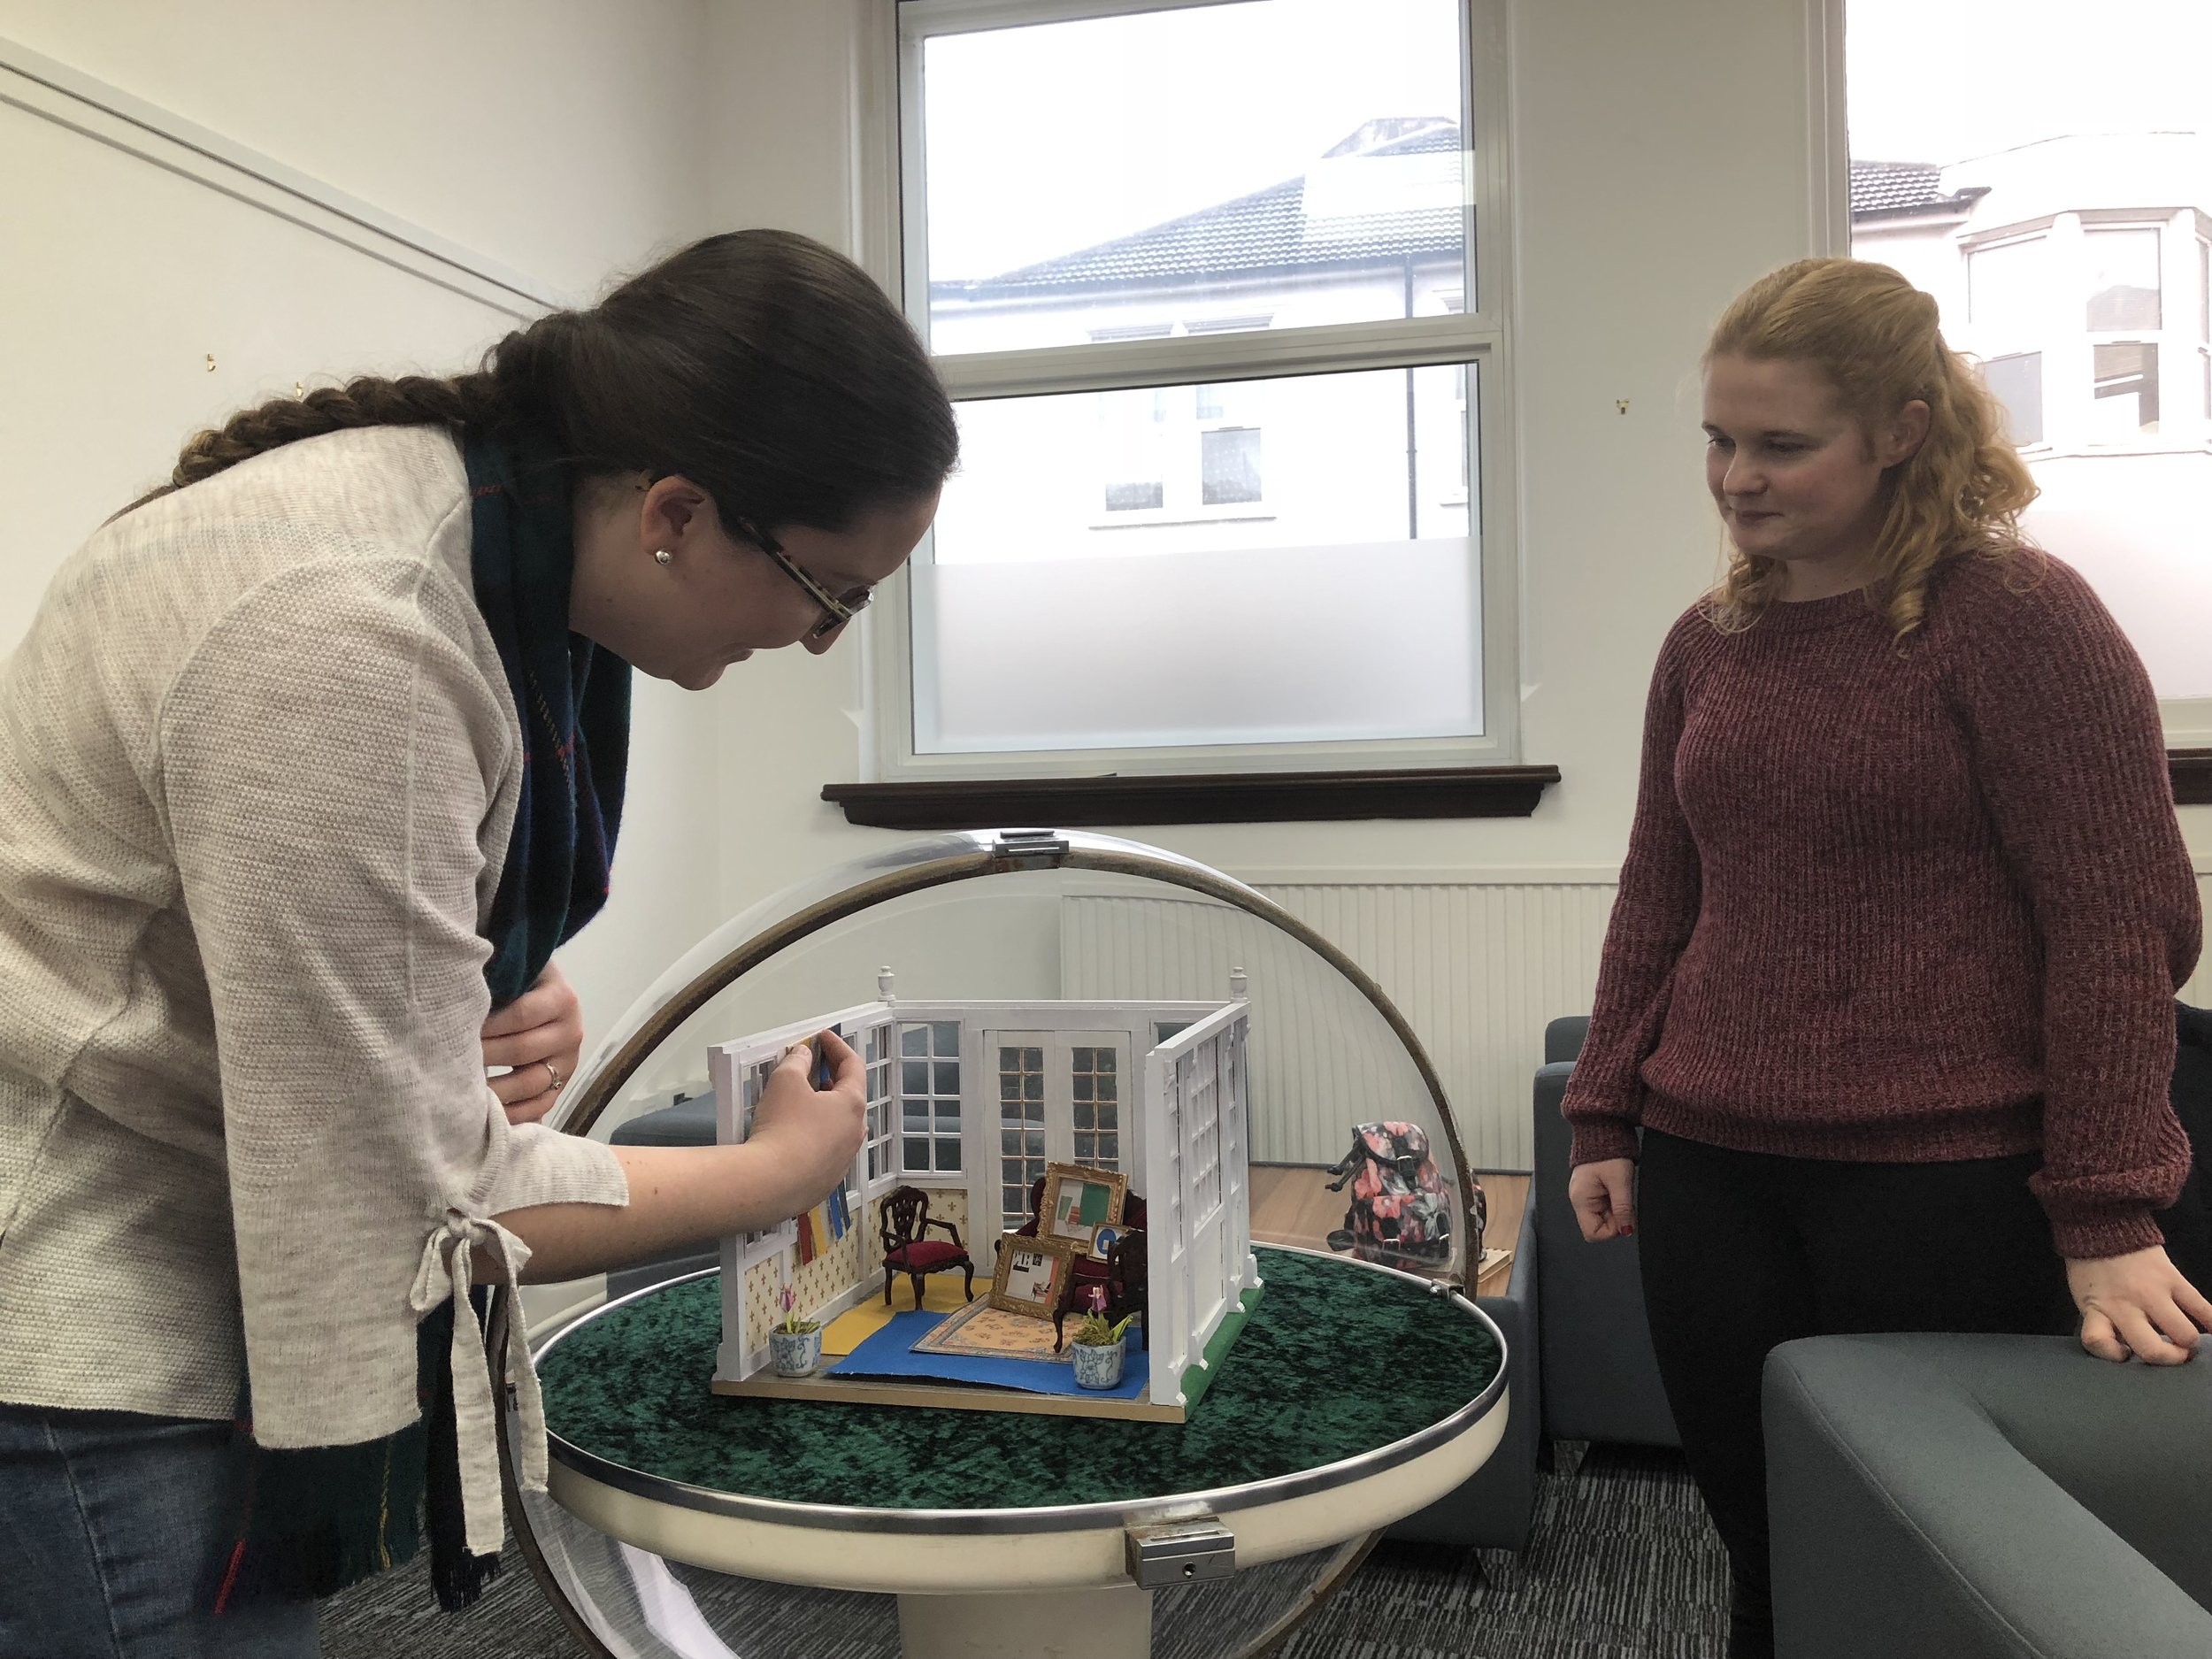  TOMA artists  Grace Price  &amp;  Kristina Bragg  installing work for their their show ‘Interior Illusion’ at Paul Robinson solicitors, 2018. 